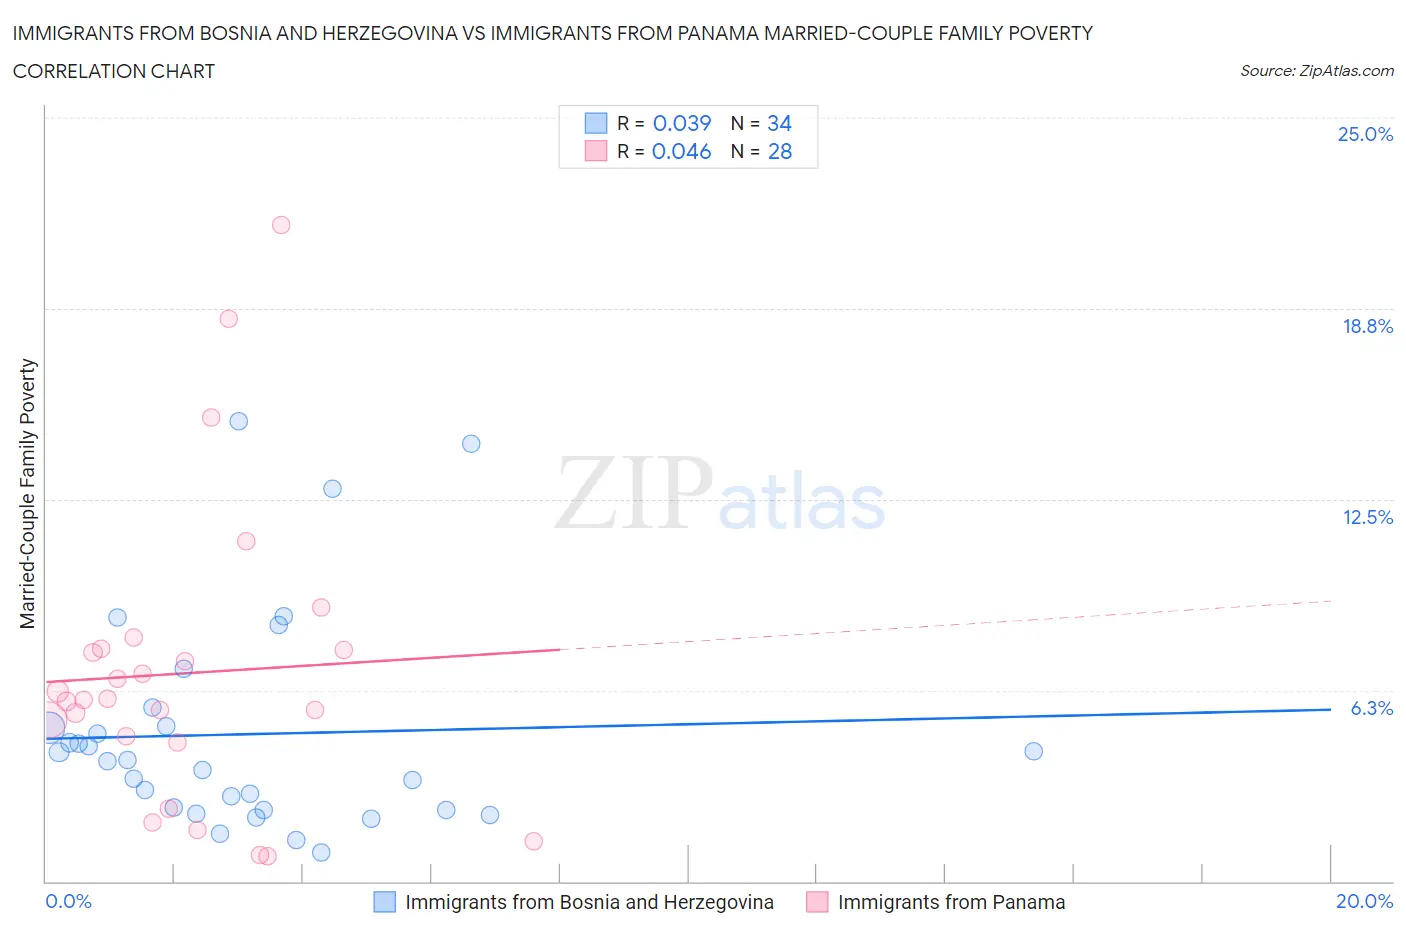 Immigrants from Bosnia and Herzegovina vs Immigrants from Panama Married-Couple Family Poverty